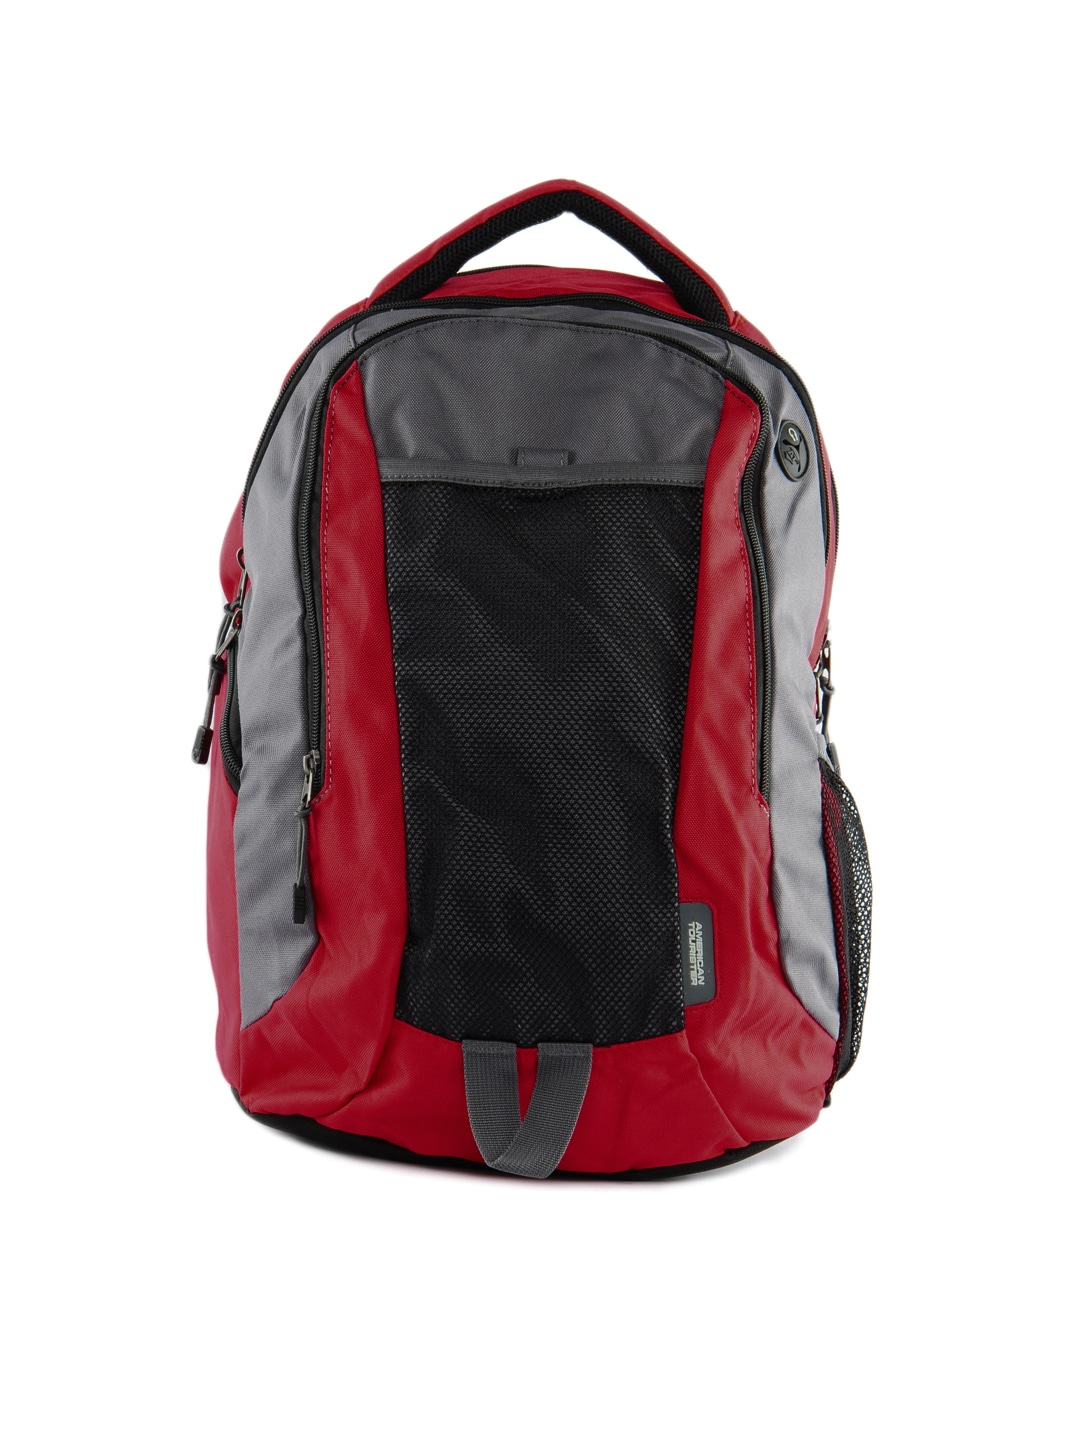 American Tourister Unisex Buzz Red Backpack